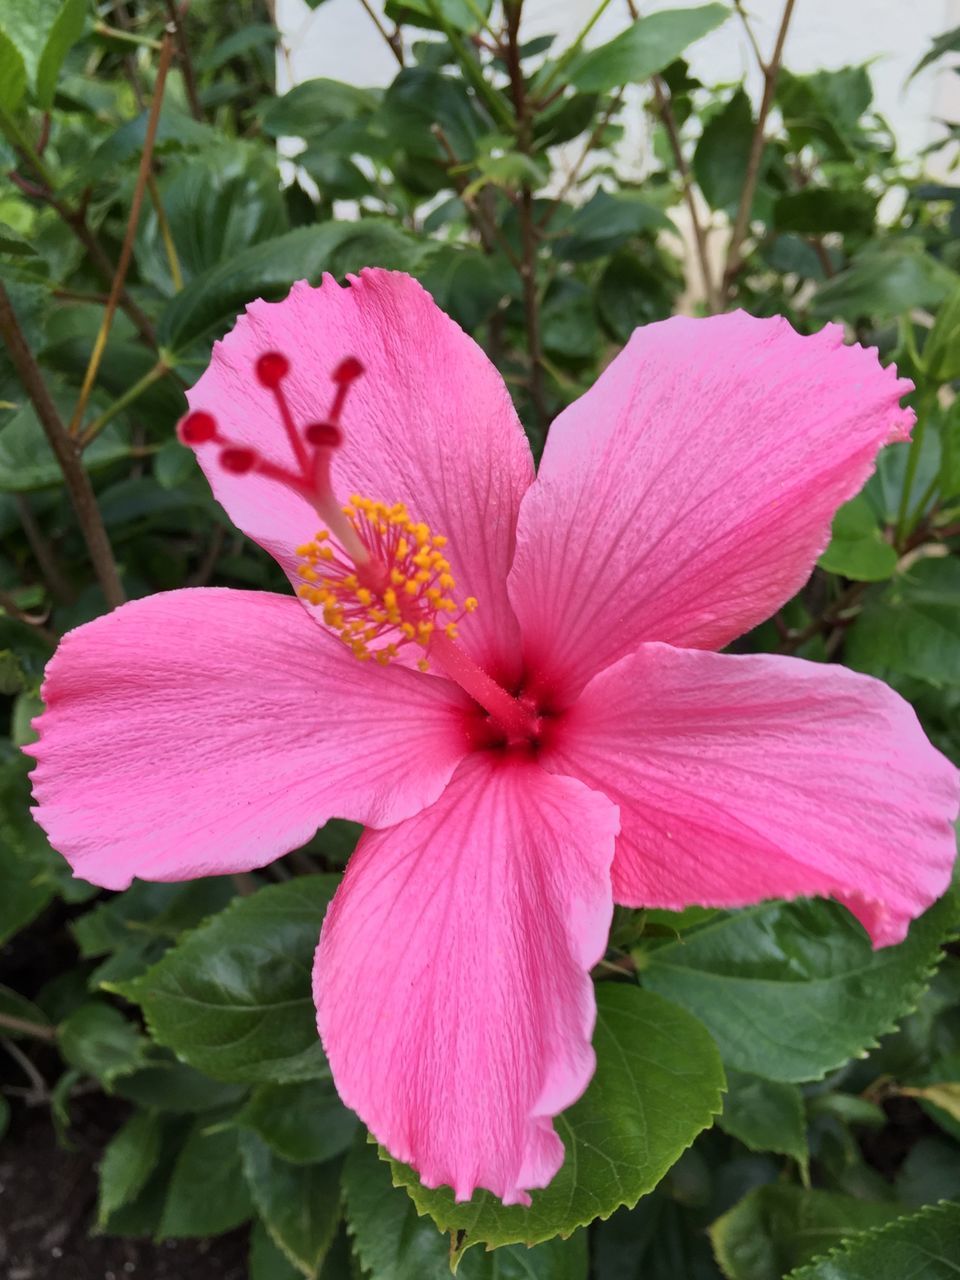 flower, petal, freshness, flower head, fragility, pink color, growth, beauty in nature, close-up, stamen, hibiscus, nature, blooming, pollen, single flower, leaf, plant, focus on foreground, in bloom, pink